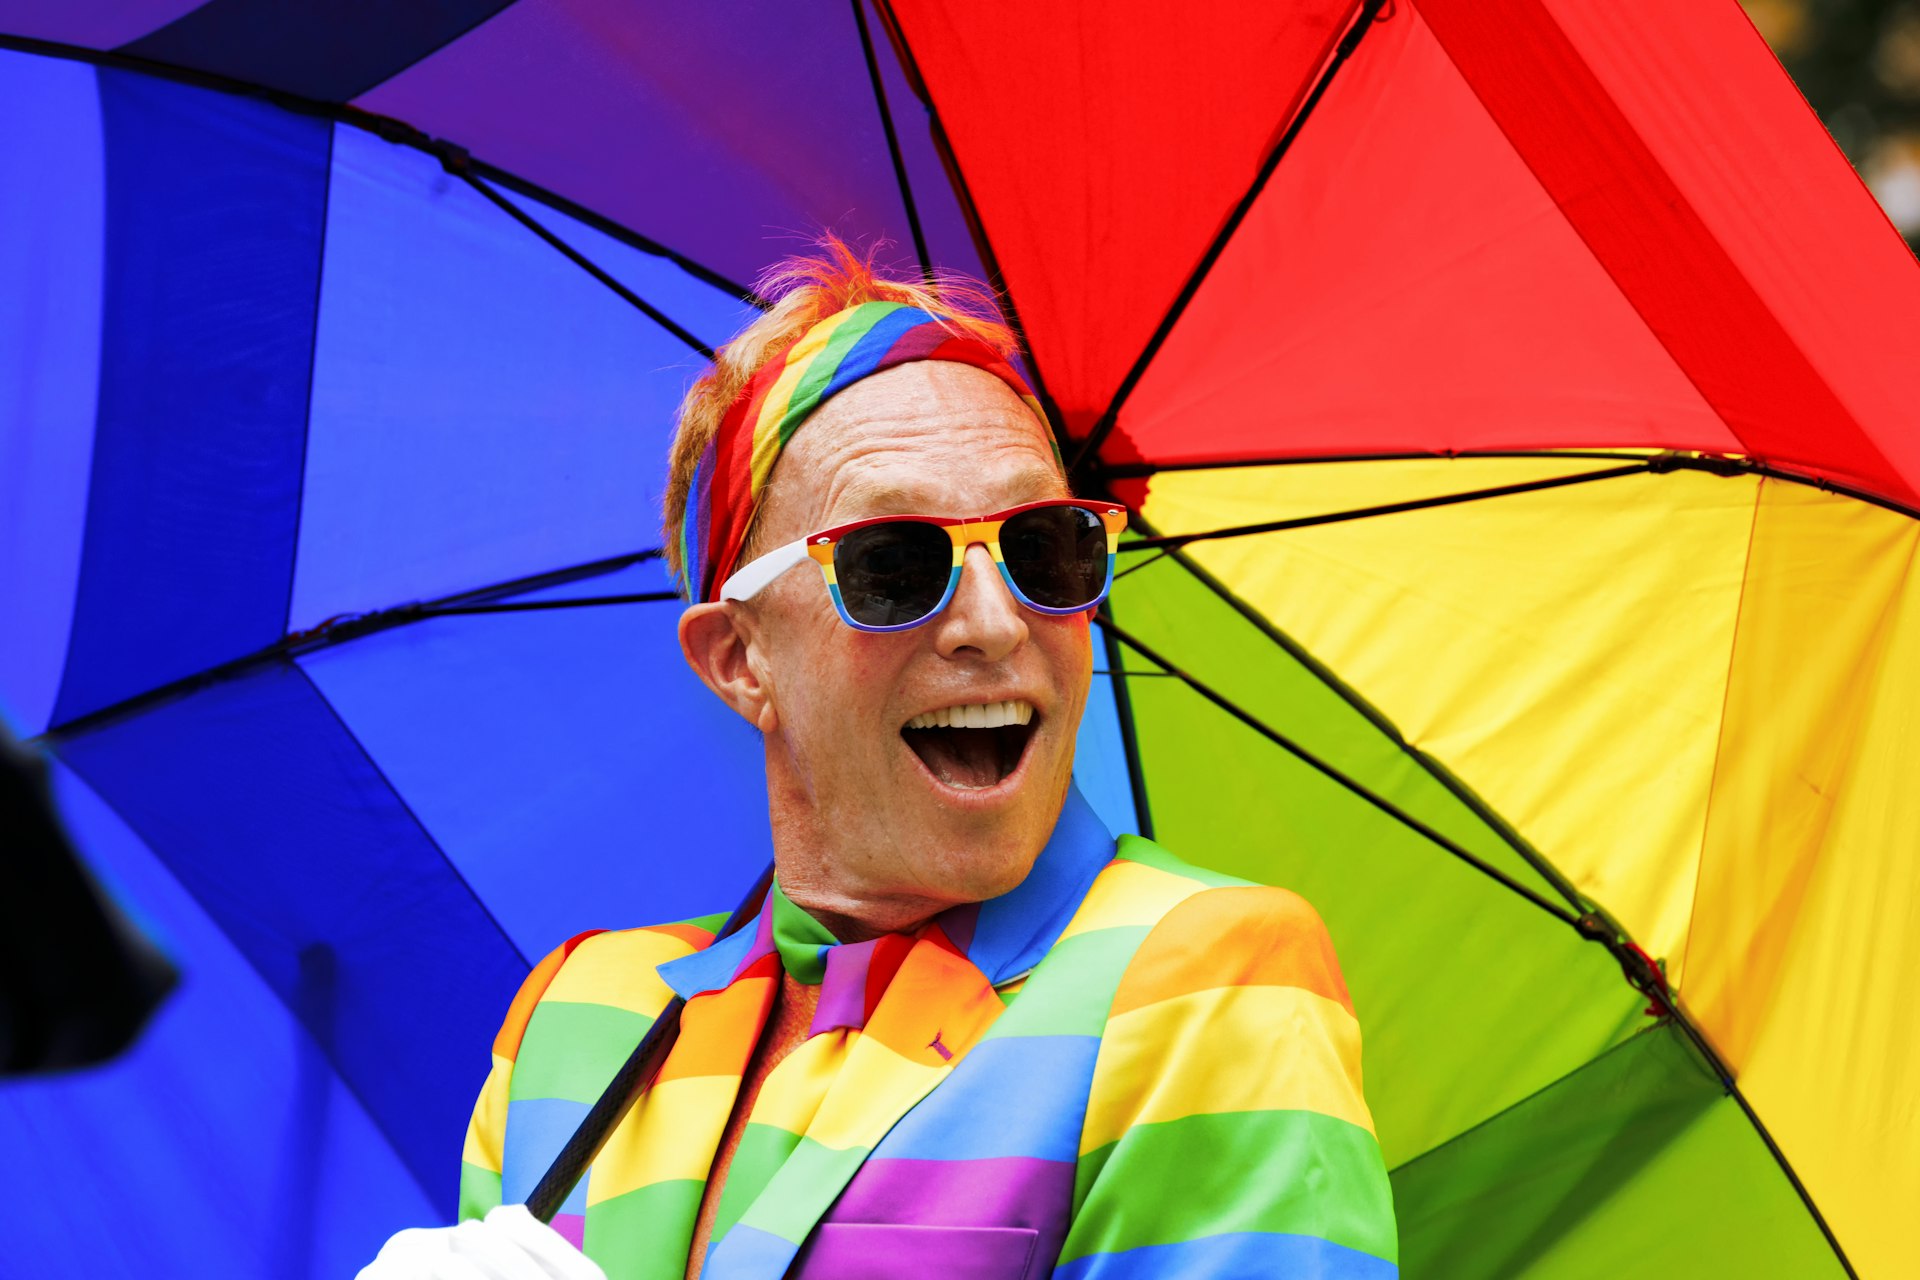 A man wearing a rainbow suit and holding a rainbow umbrella in the NYC Pride March. Gay Pride events occur throughout the month of June, culminating with the March along 5th Avenue